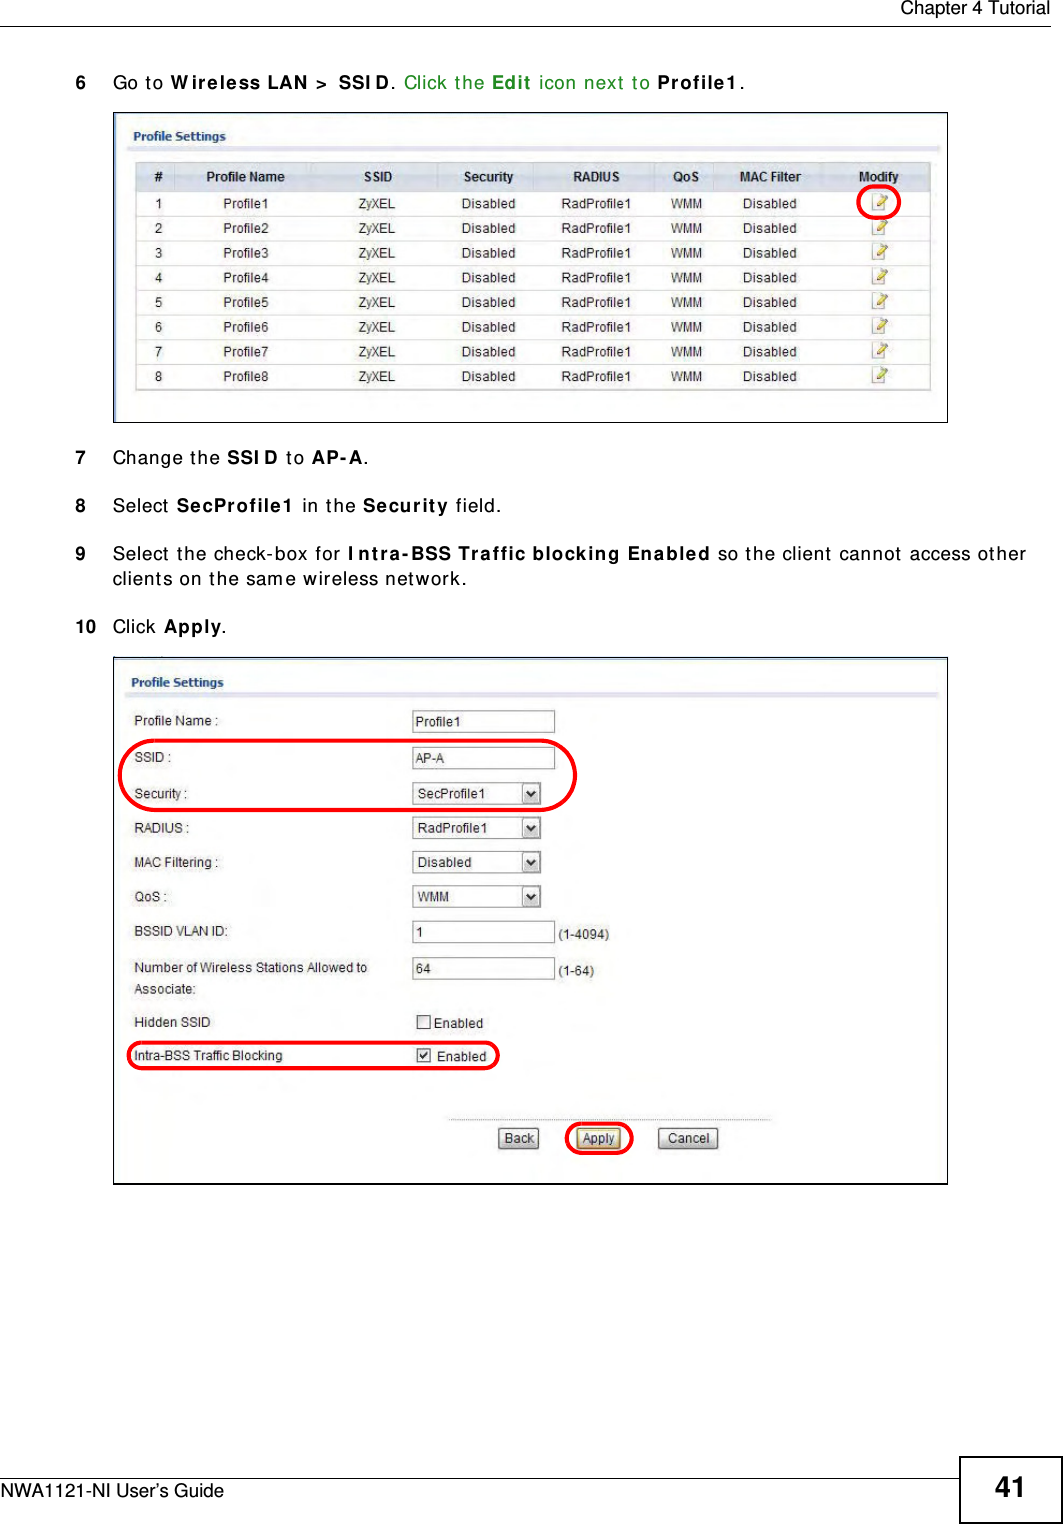  Chapter 4 TutorialNWA1121-NI User’s Guide 416Go to Wireless LAN &gt; SSID. Click the Edit icon next to Profile1.7Change the SSID to AP-A. 8Select SecProfile1 in the Security field. 9Select the check-box for Intra-BSS Traffic blocking Enabled so the client cannot access other clients on the same wireless network.10 Click Apply.